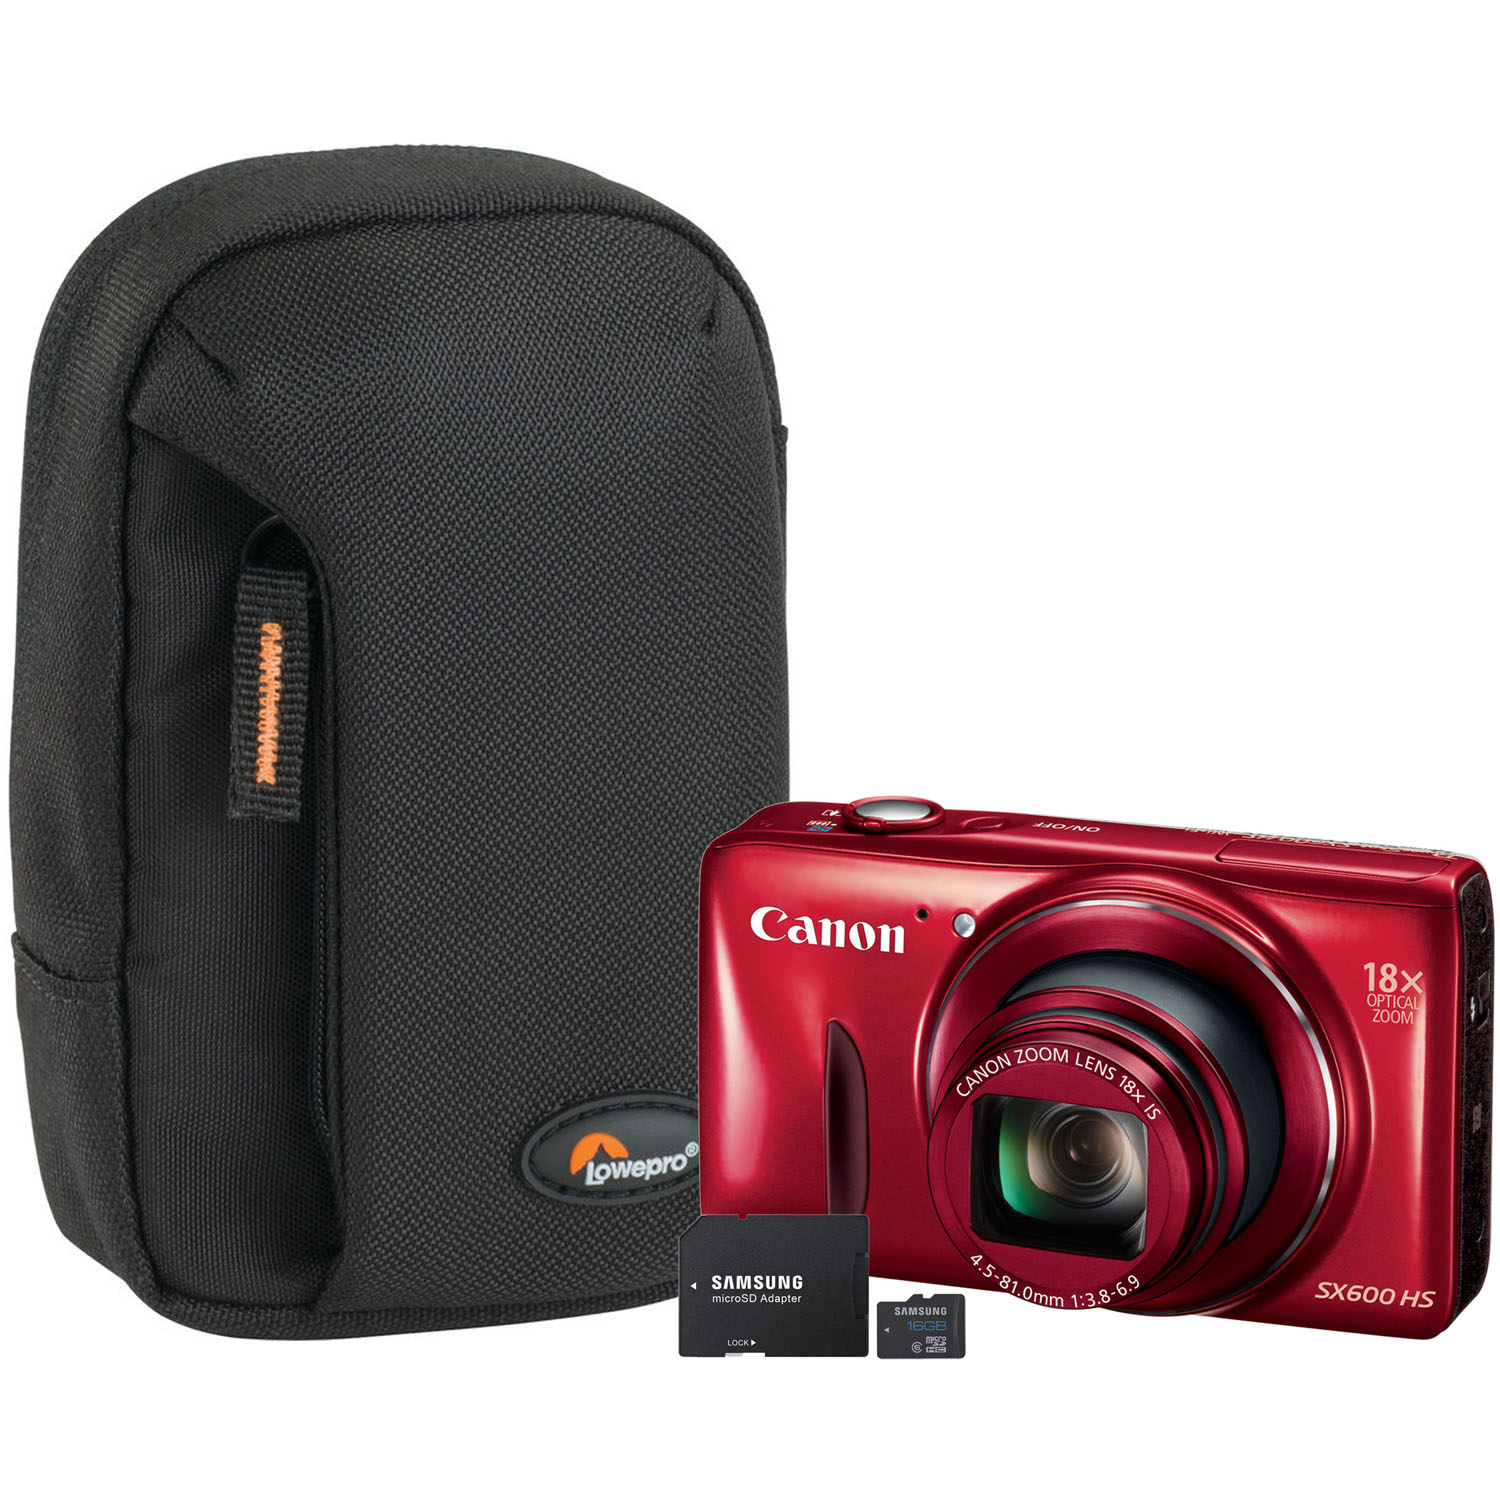 PowerShot SX600 HS 16.1MP Red Digital Camera, 16GB microSD Card with Adapter and Compact Camera Pouch